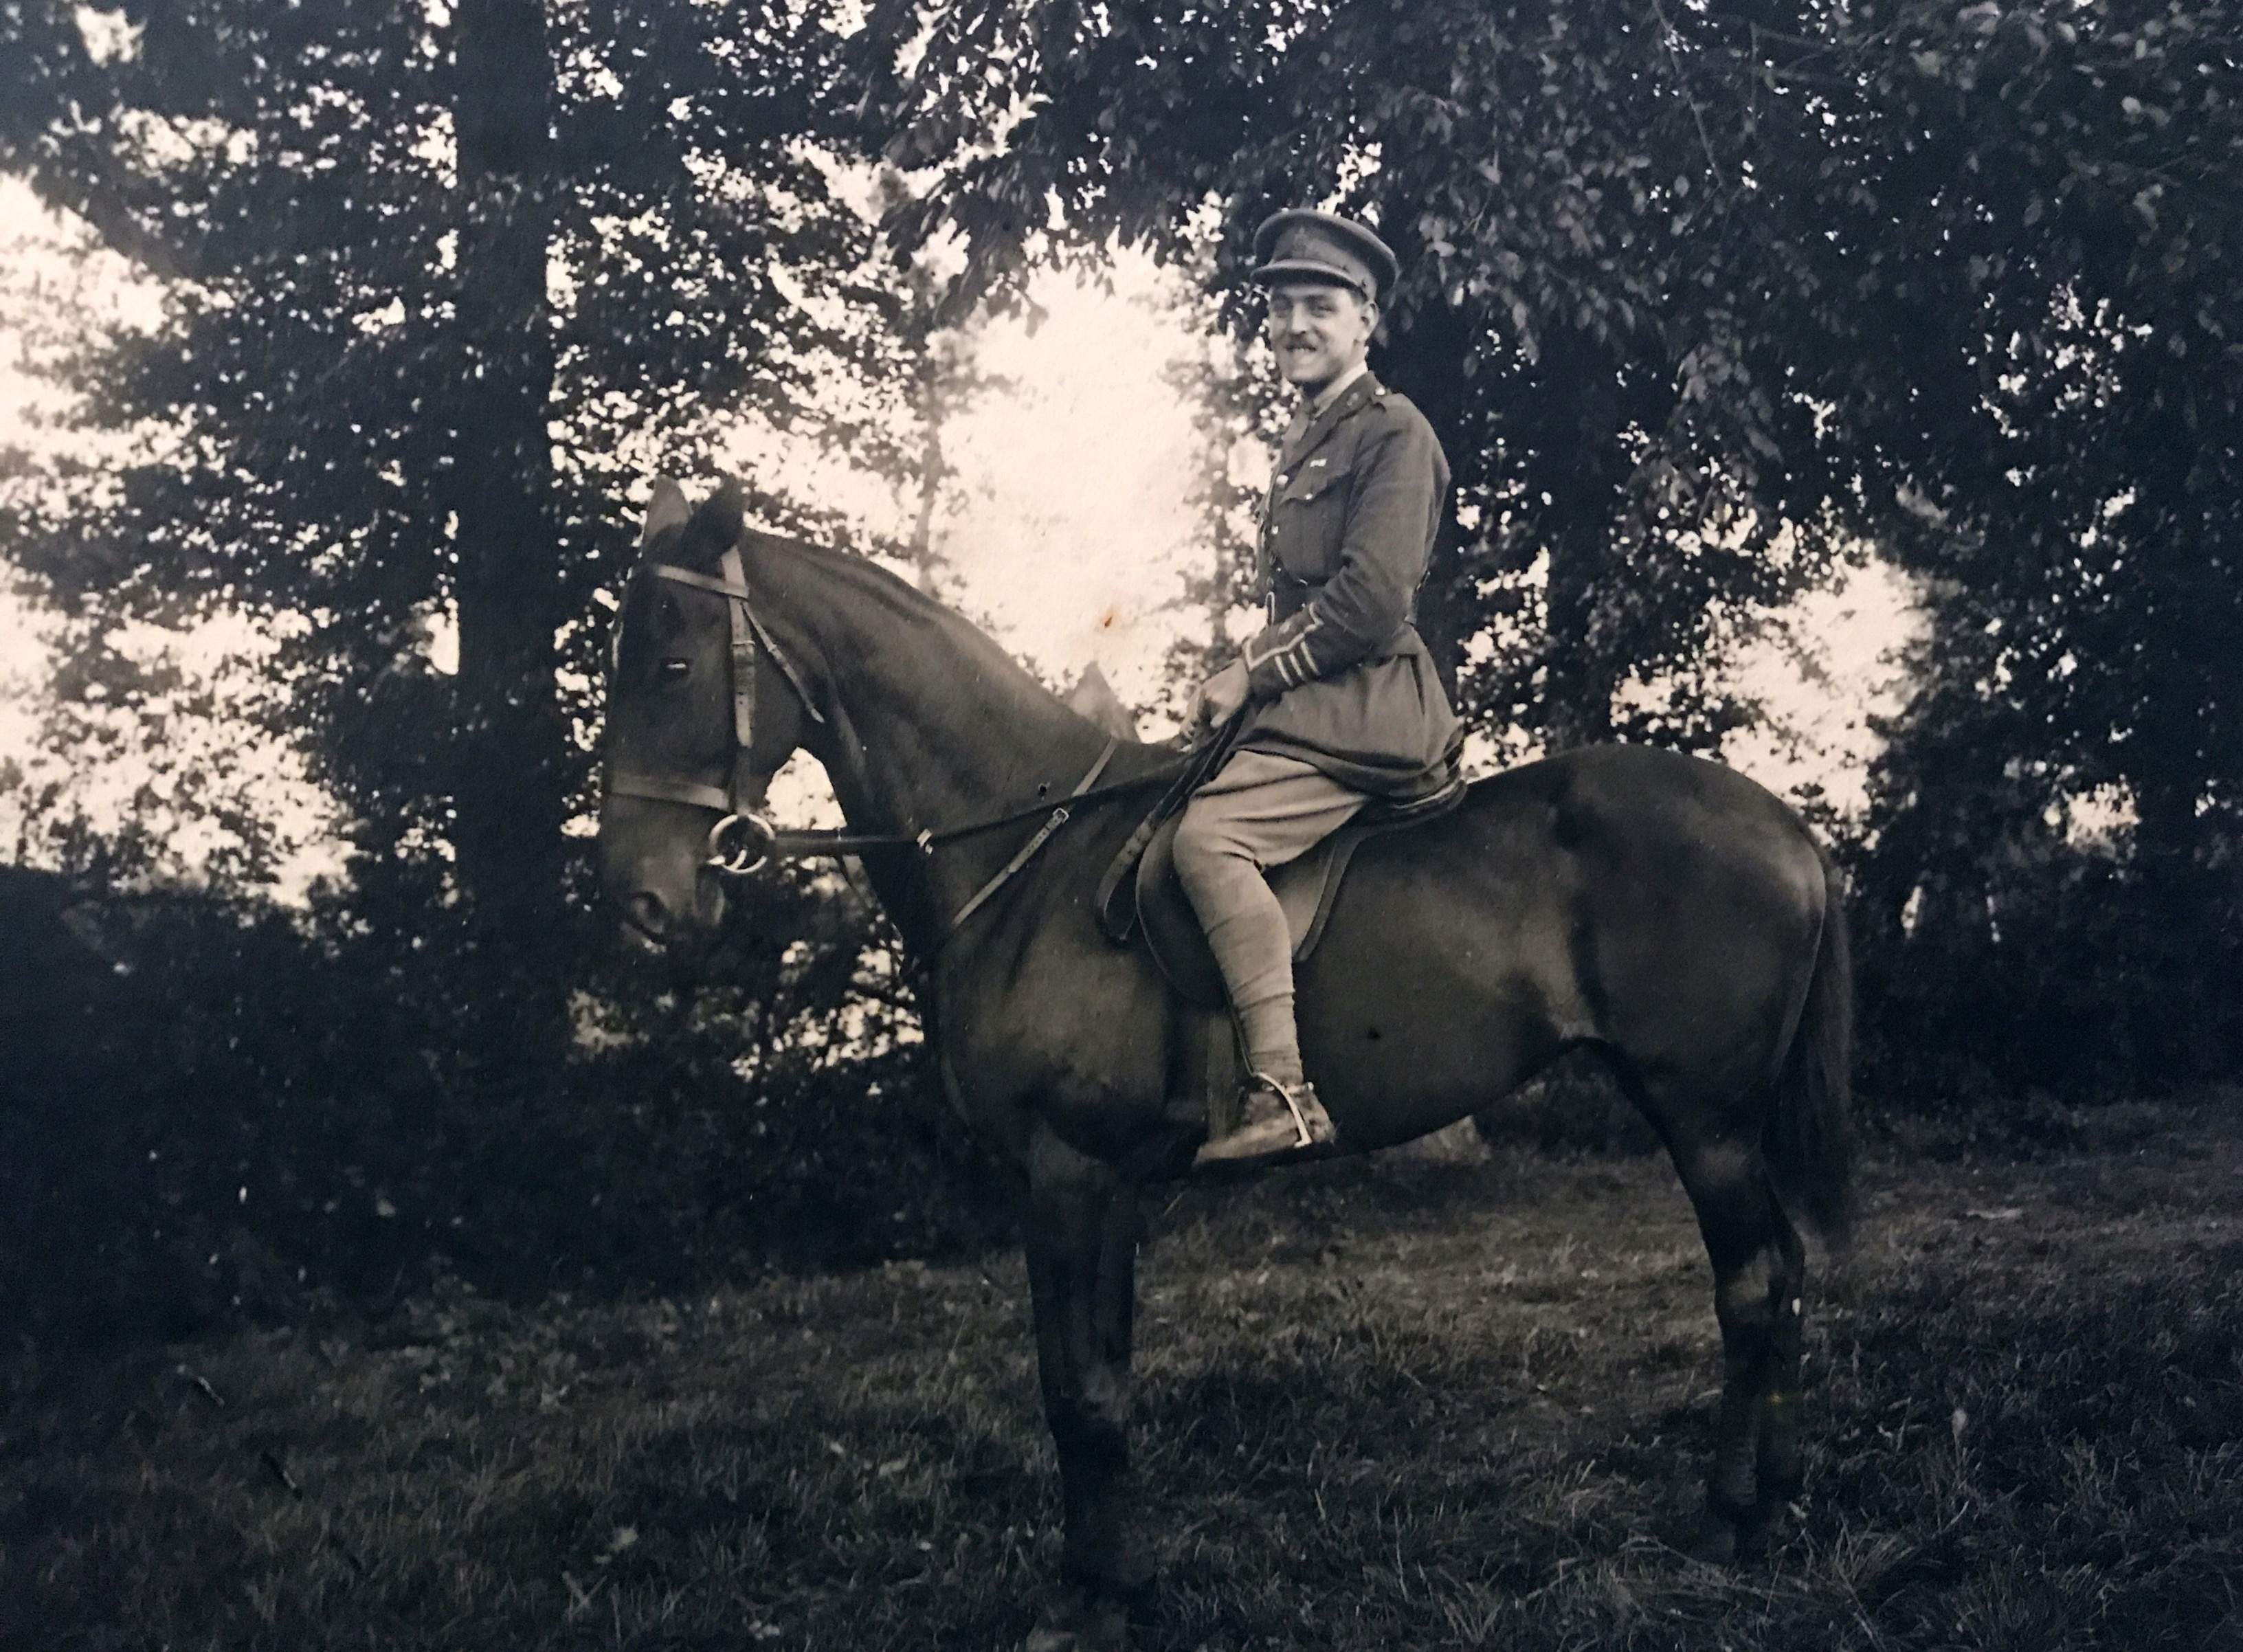 Lieutenant Colonel Cadifor Hilditch MC DSO with his faithful horse Milady 
1888-1919
